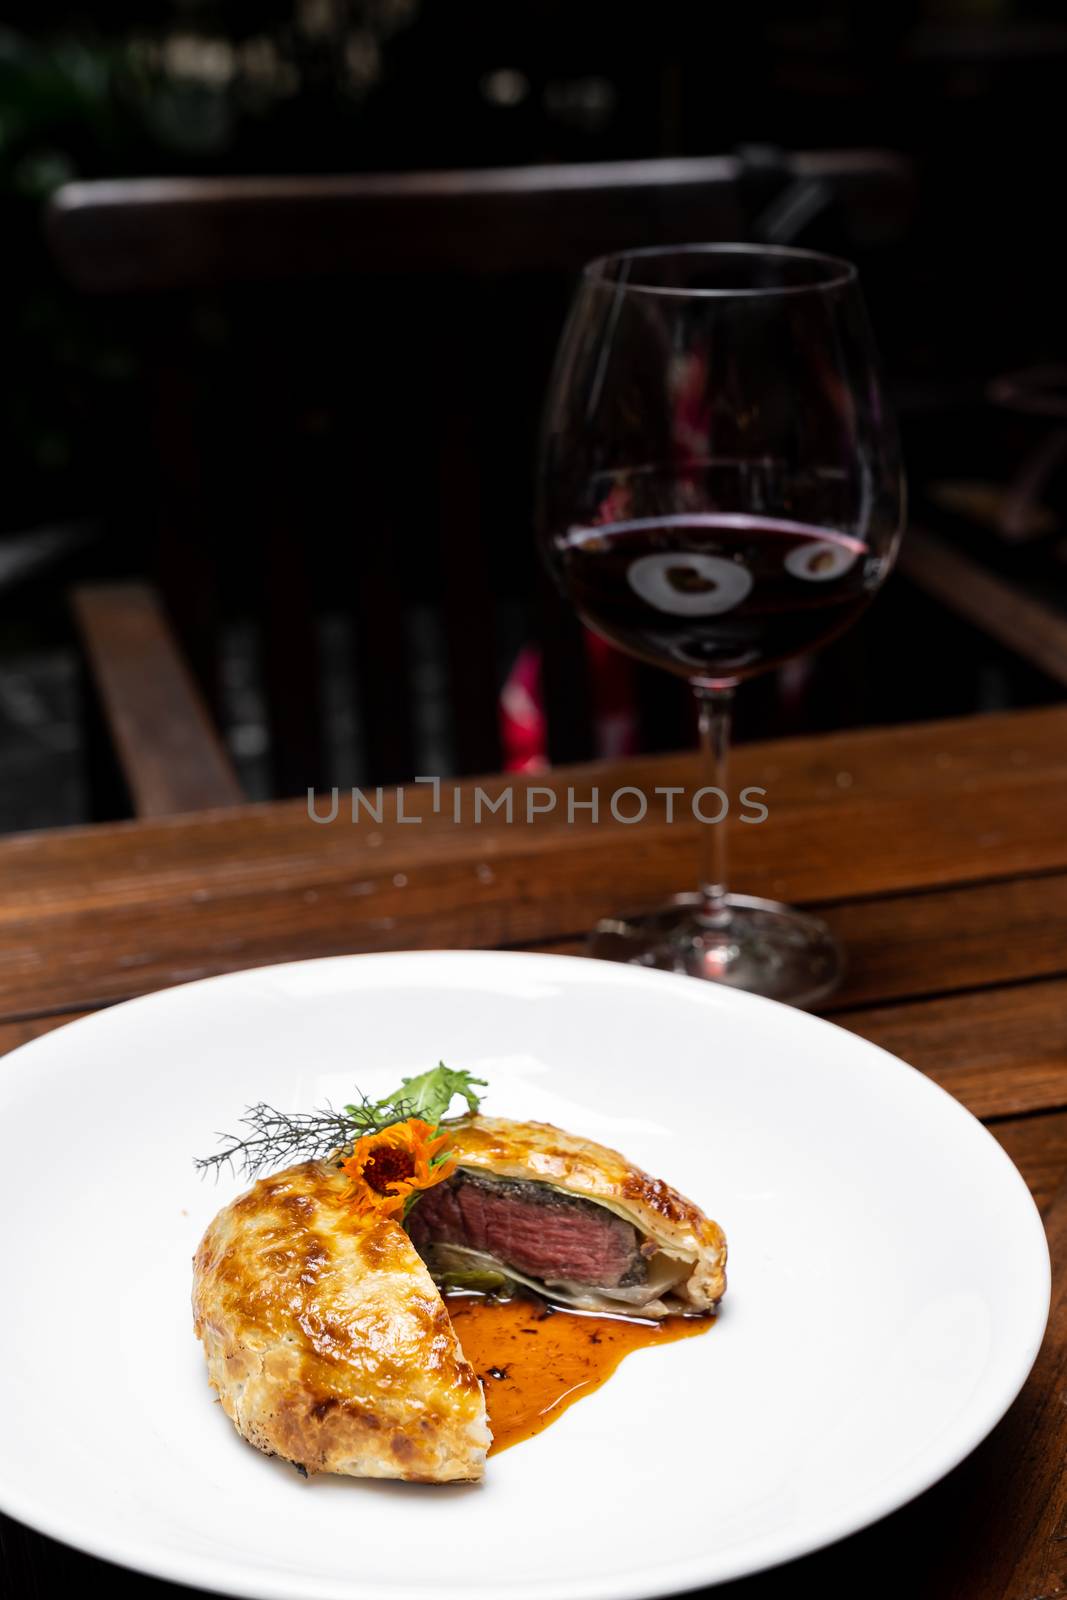 Roasted Beef Wellington with gravy brown savory sauce, international gourmet cuisine of stuff beef meat in baked bread puff with glass of red wine. Unising for recipe menu pf food and drink industry.